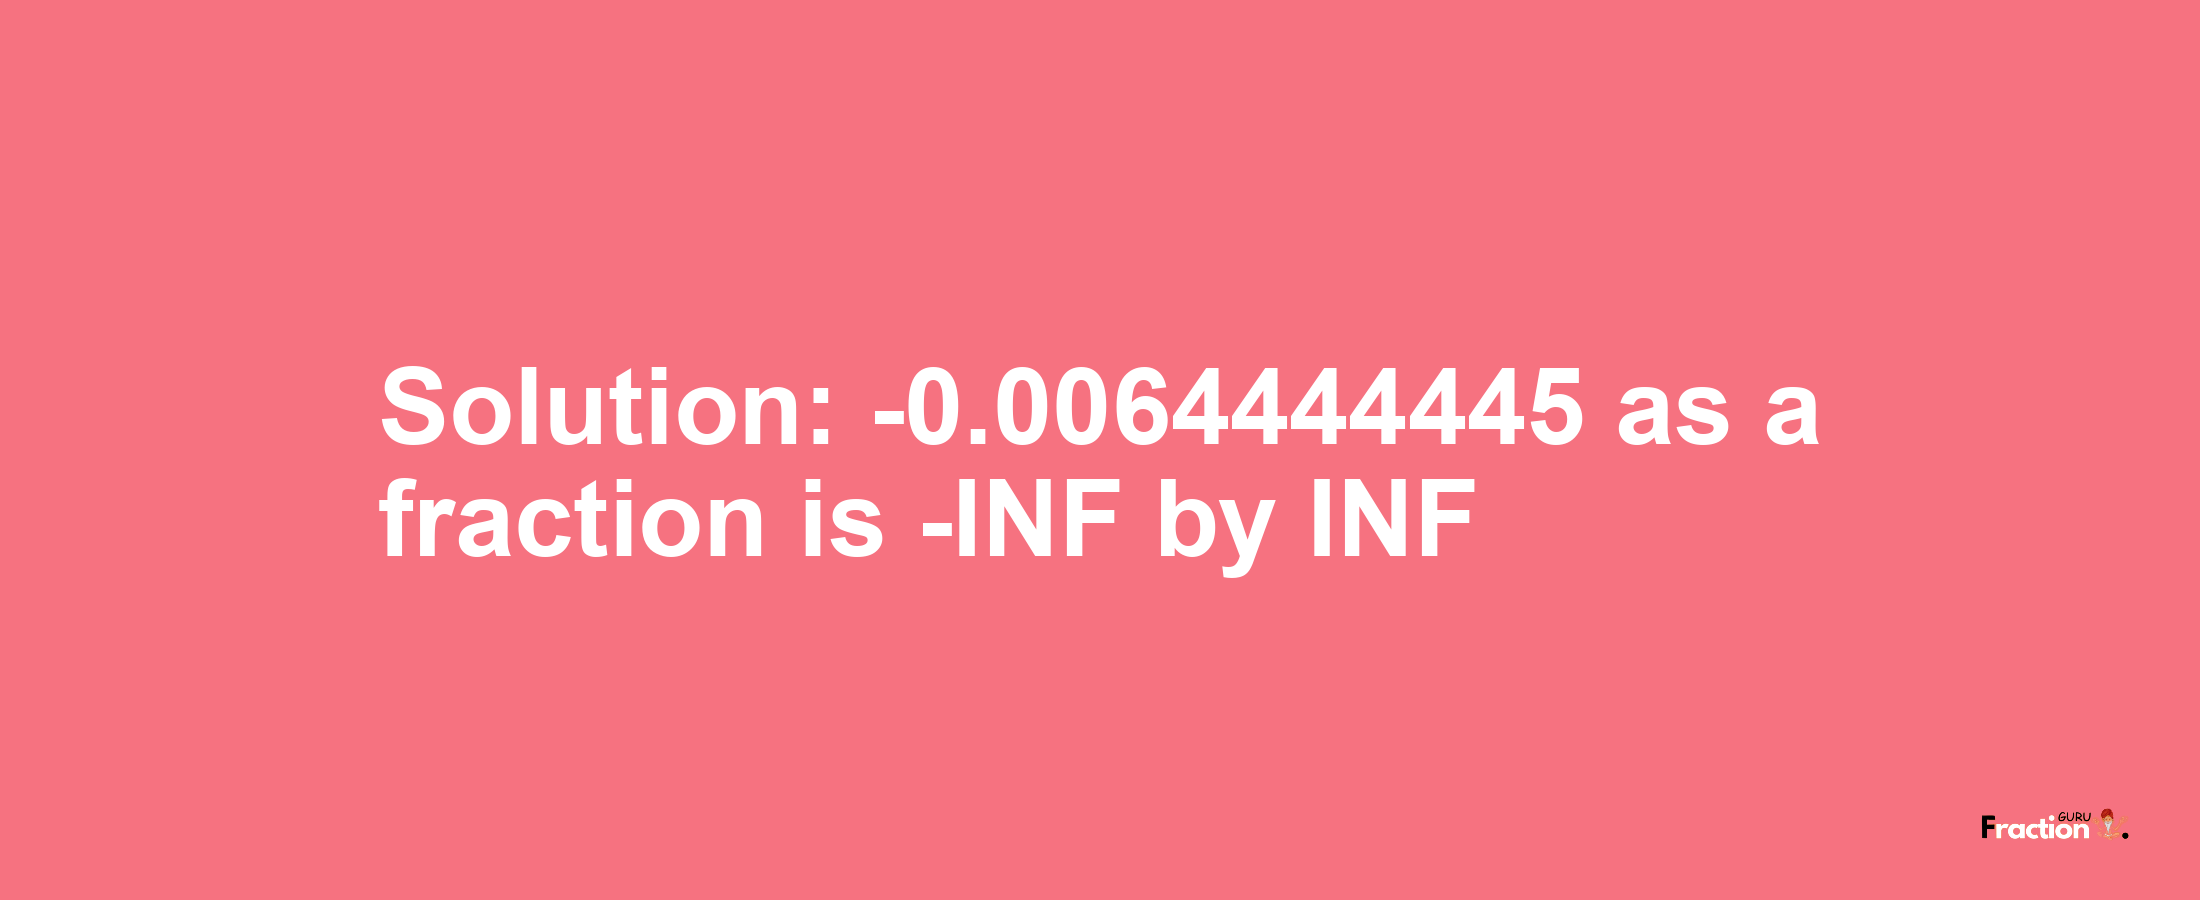 Solution:-0.0064444445 as a fraction is -INF/INF